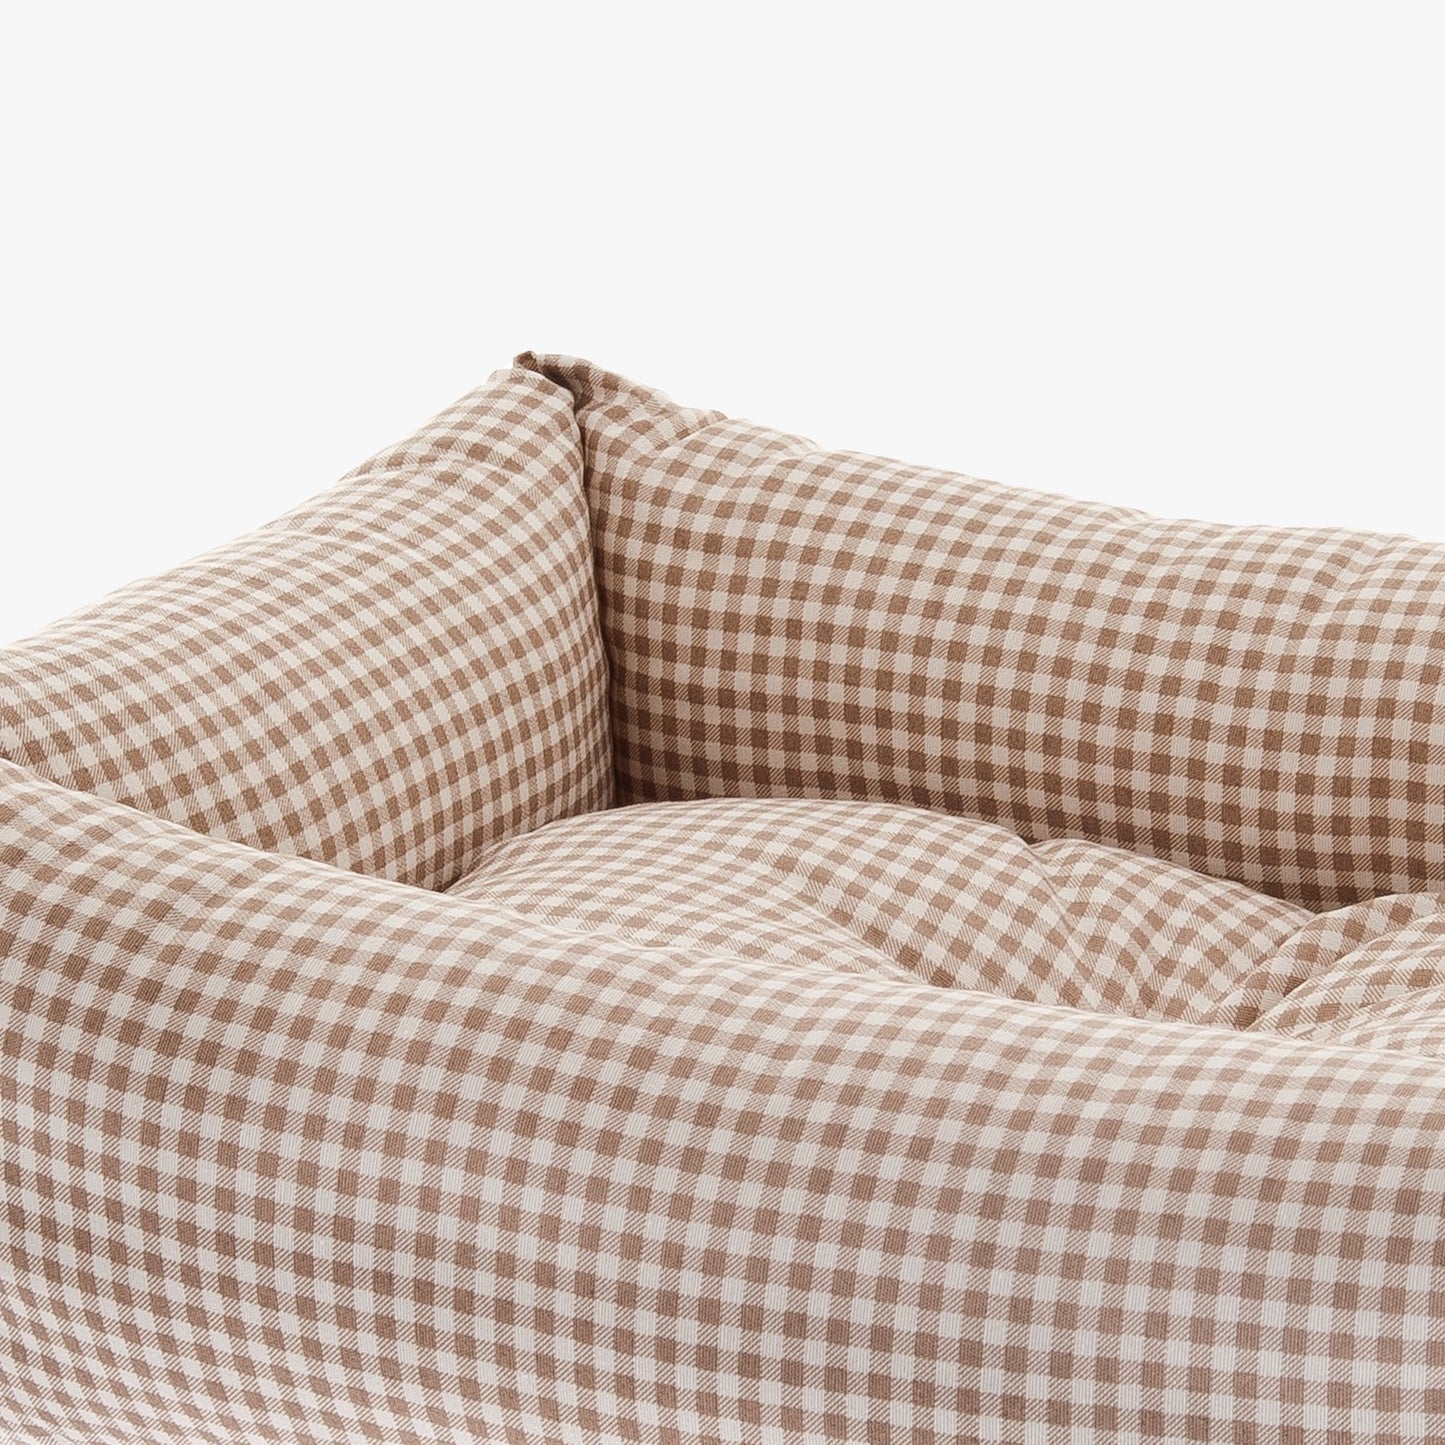 Beige Checked Cotton Bed - Waterproof Base